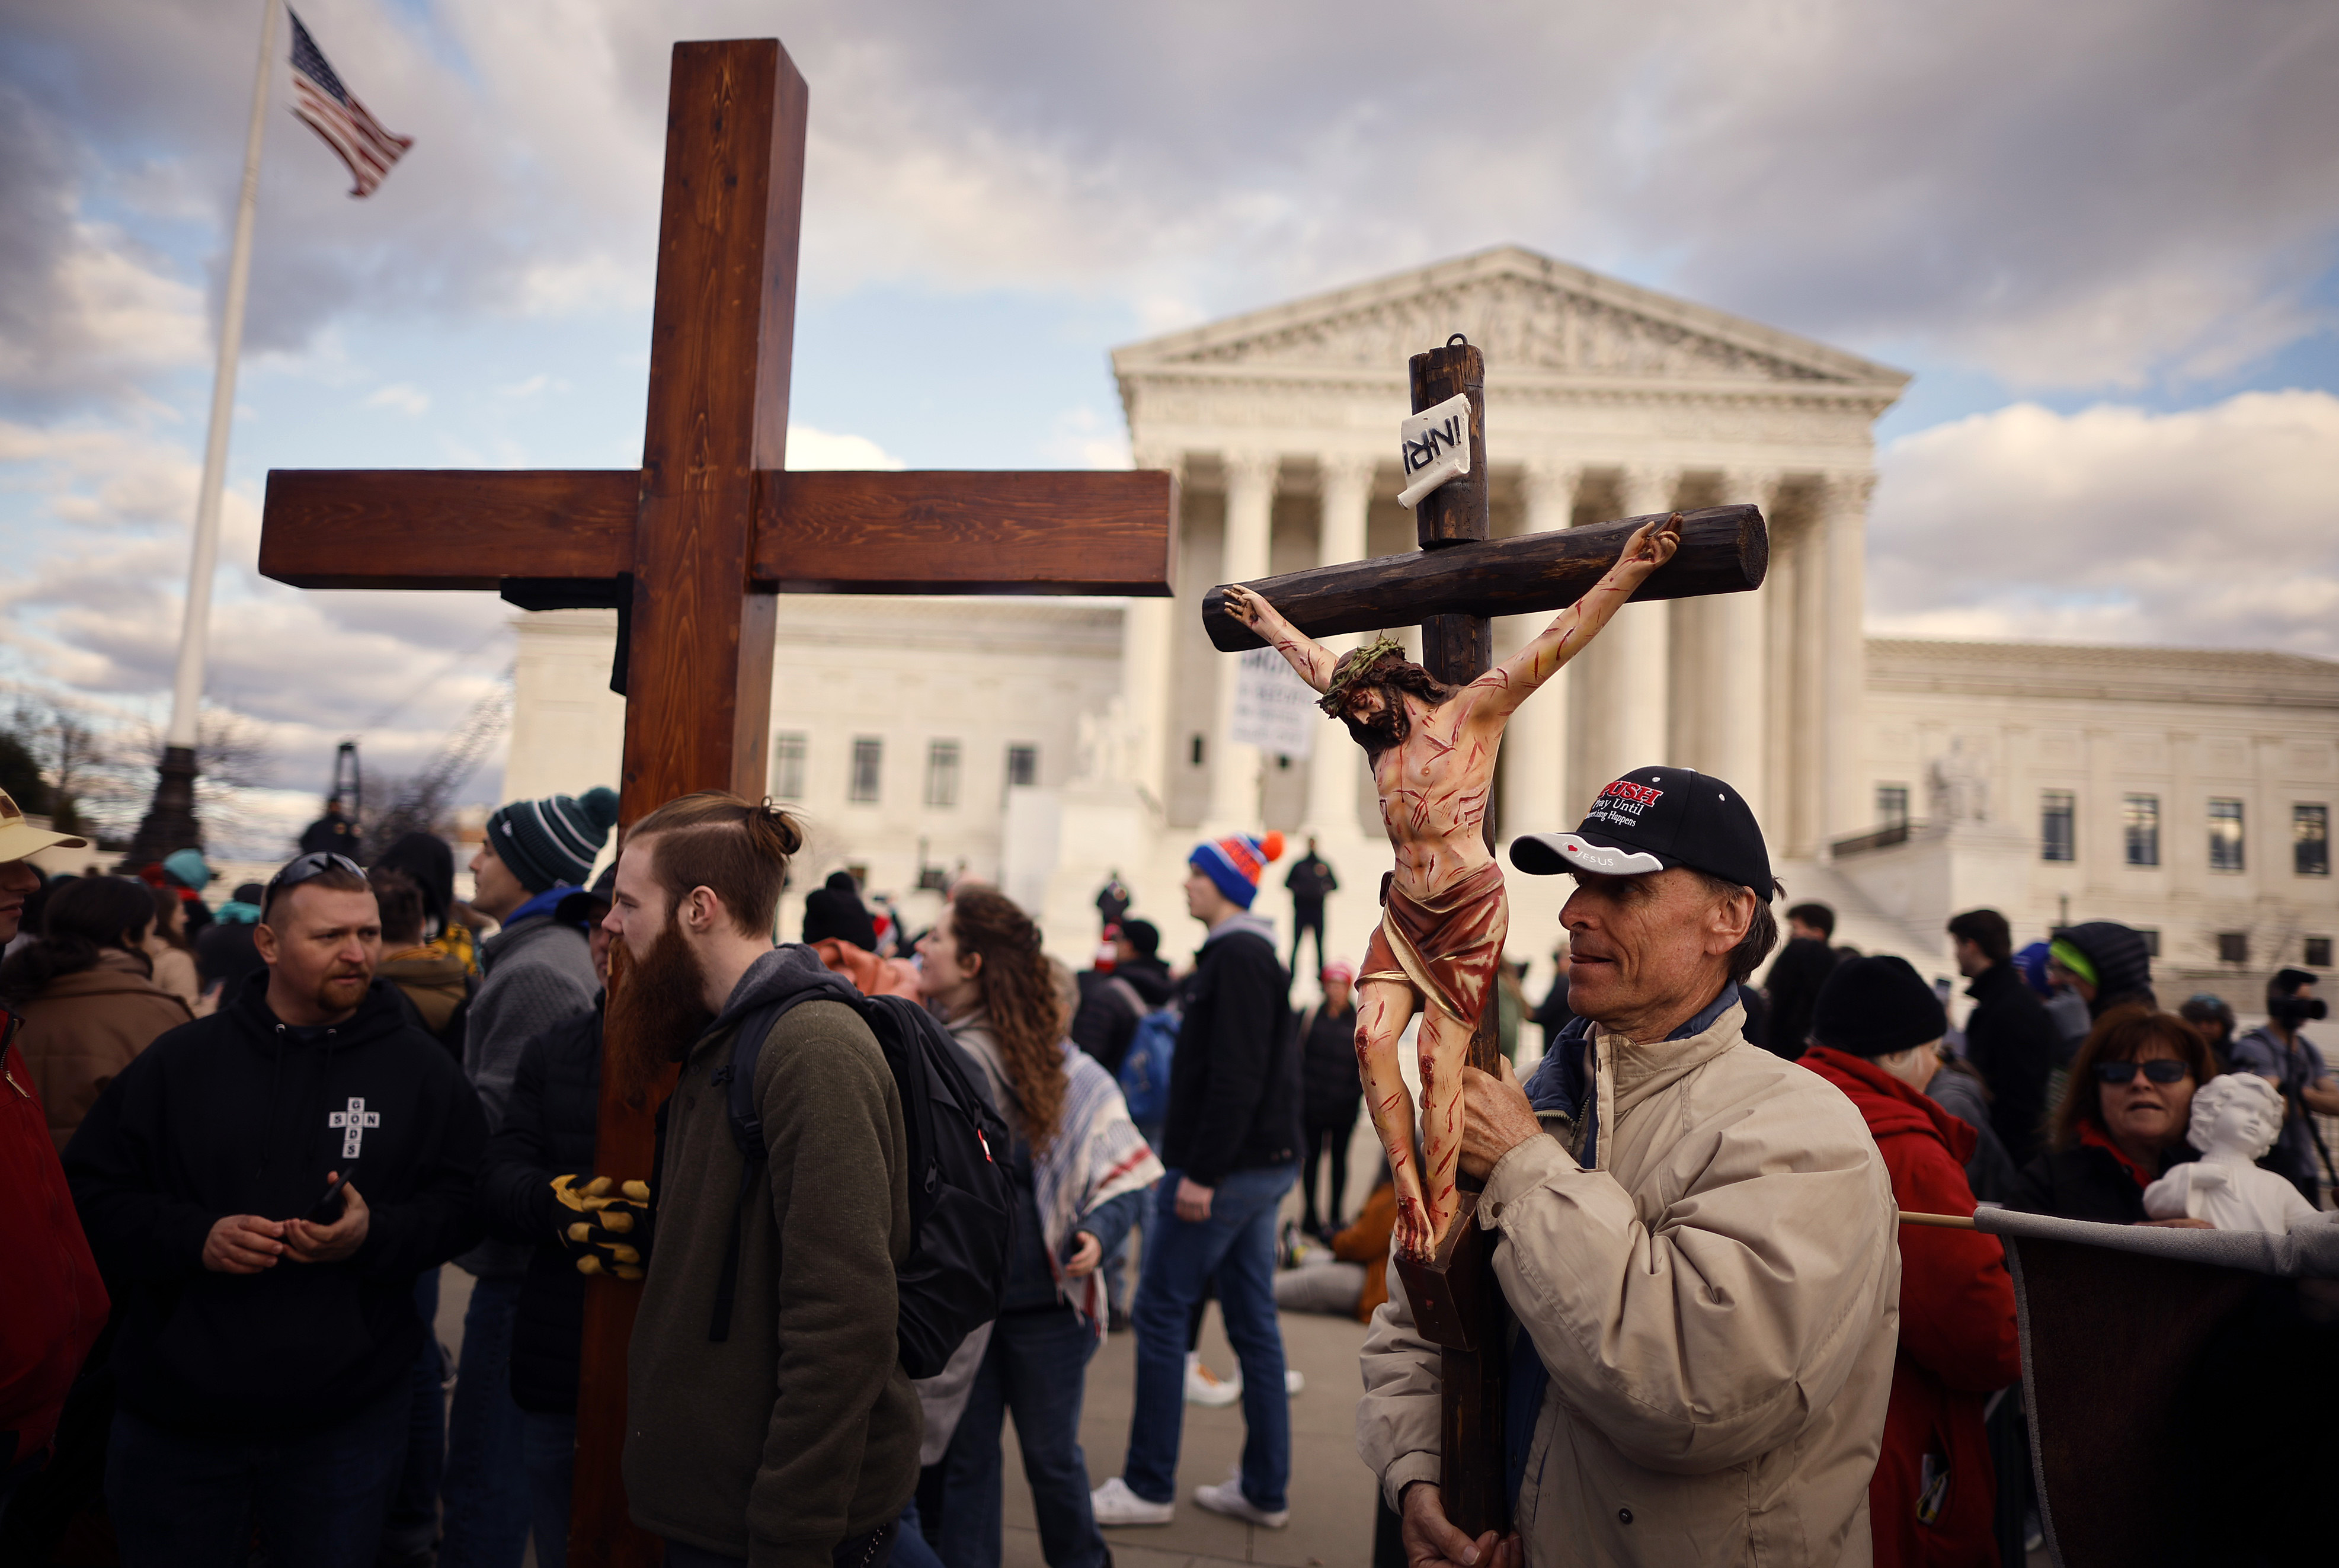 People carrying Christian religious symbols in front of the Supreme Court building.